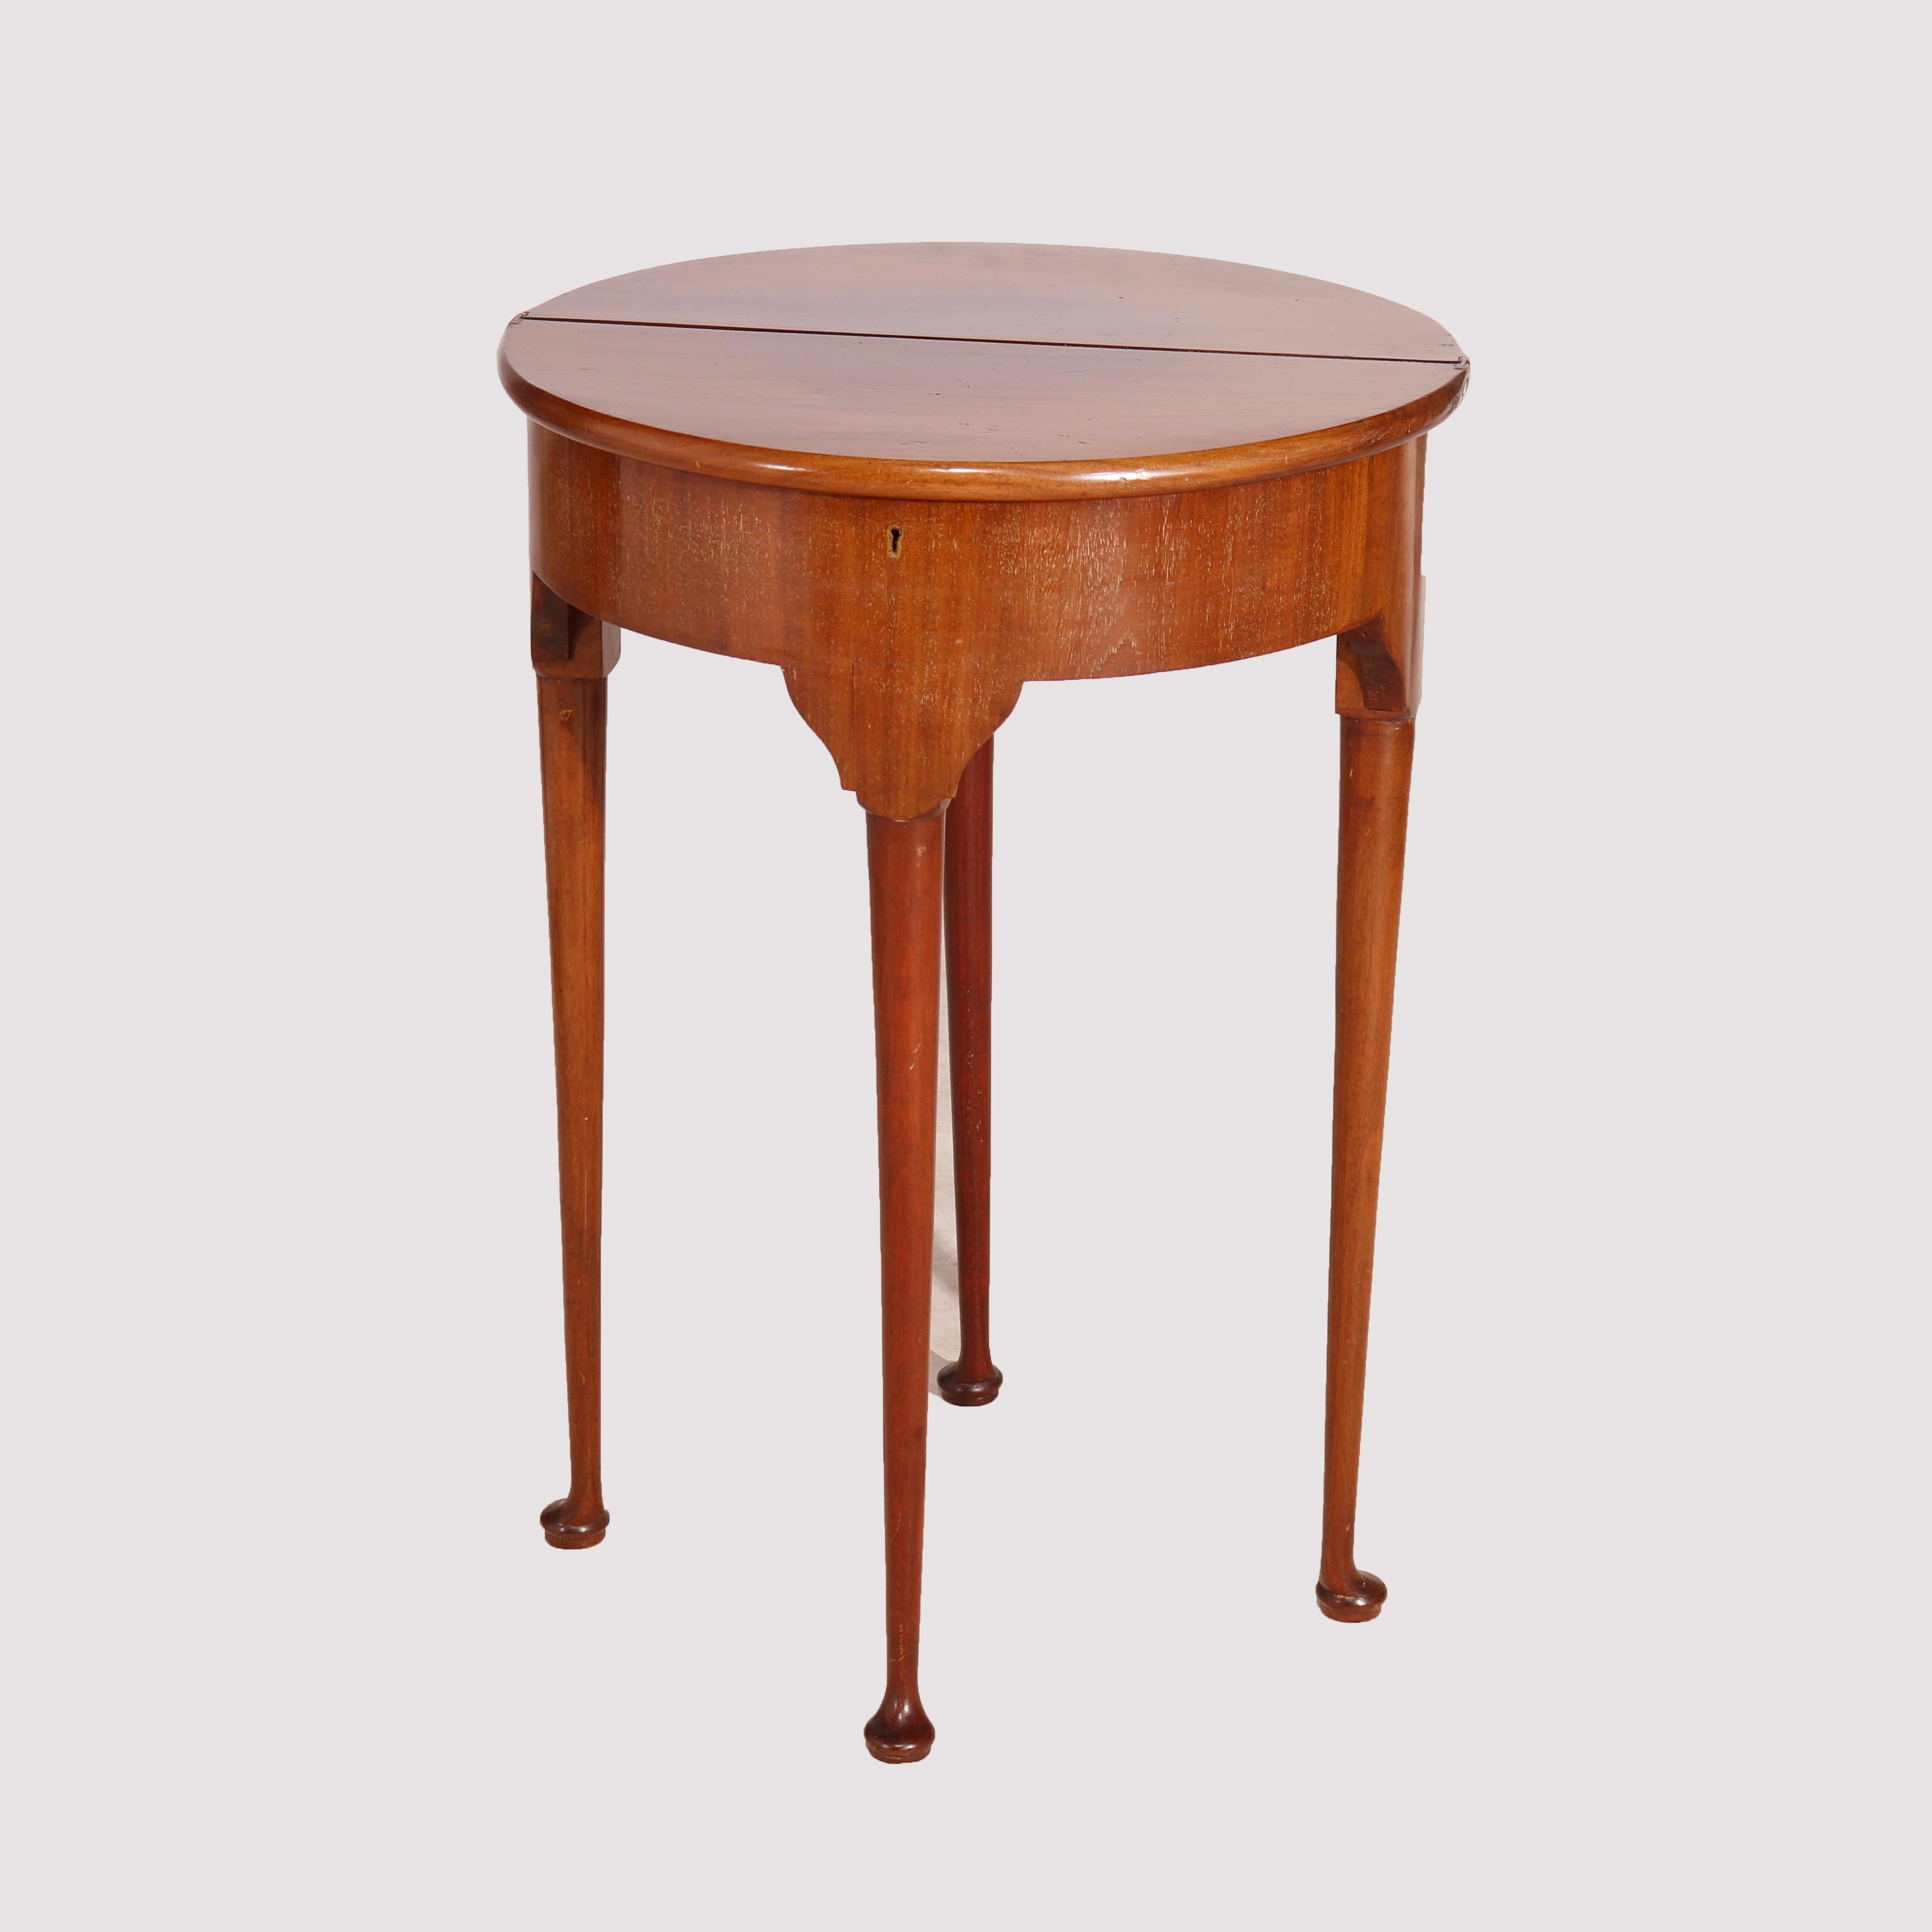 English Queen Anne Mahogany Demilune Lift Top Table, 20th Century For Sale 5